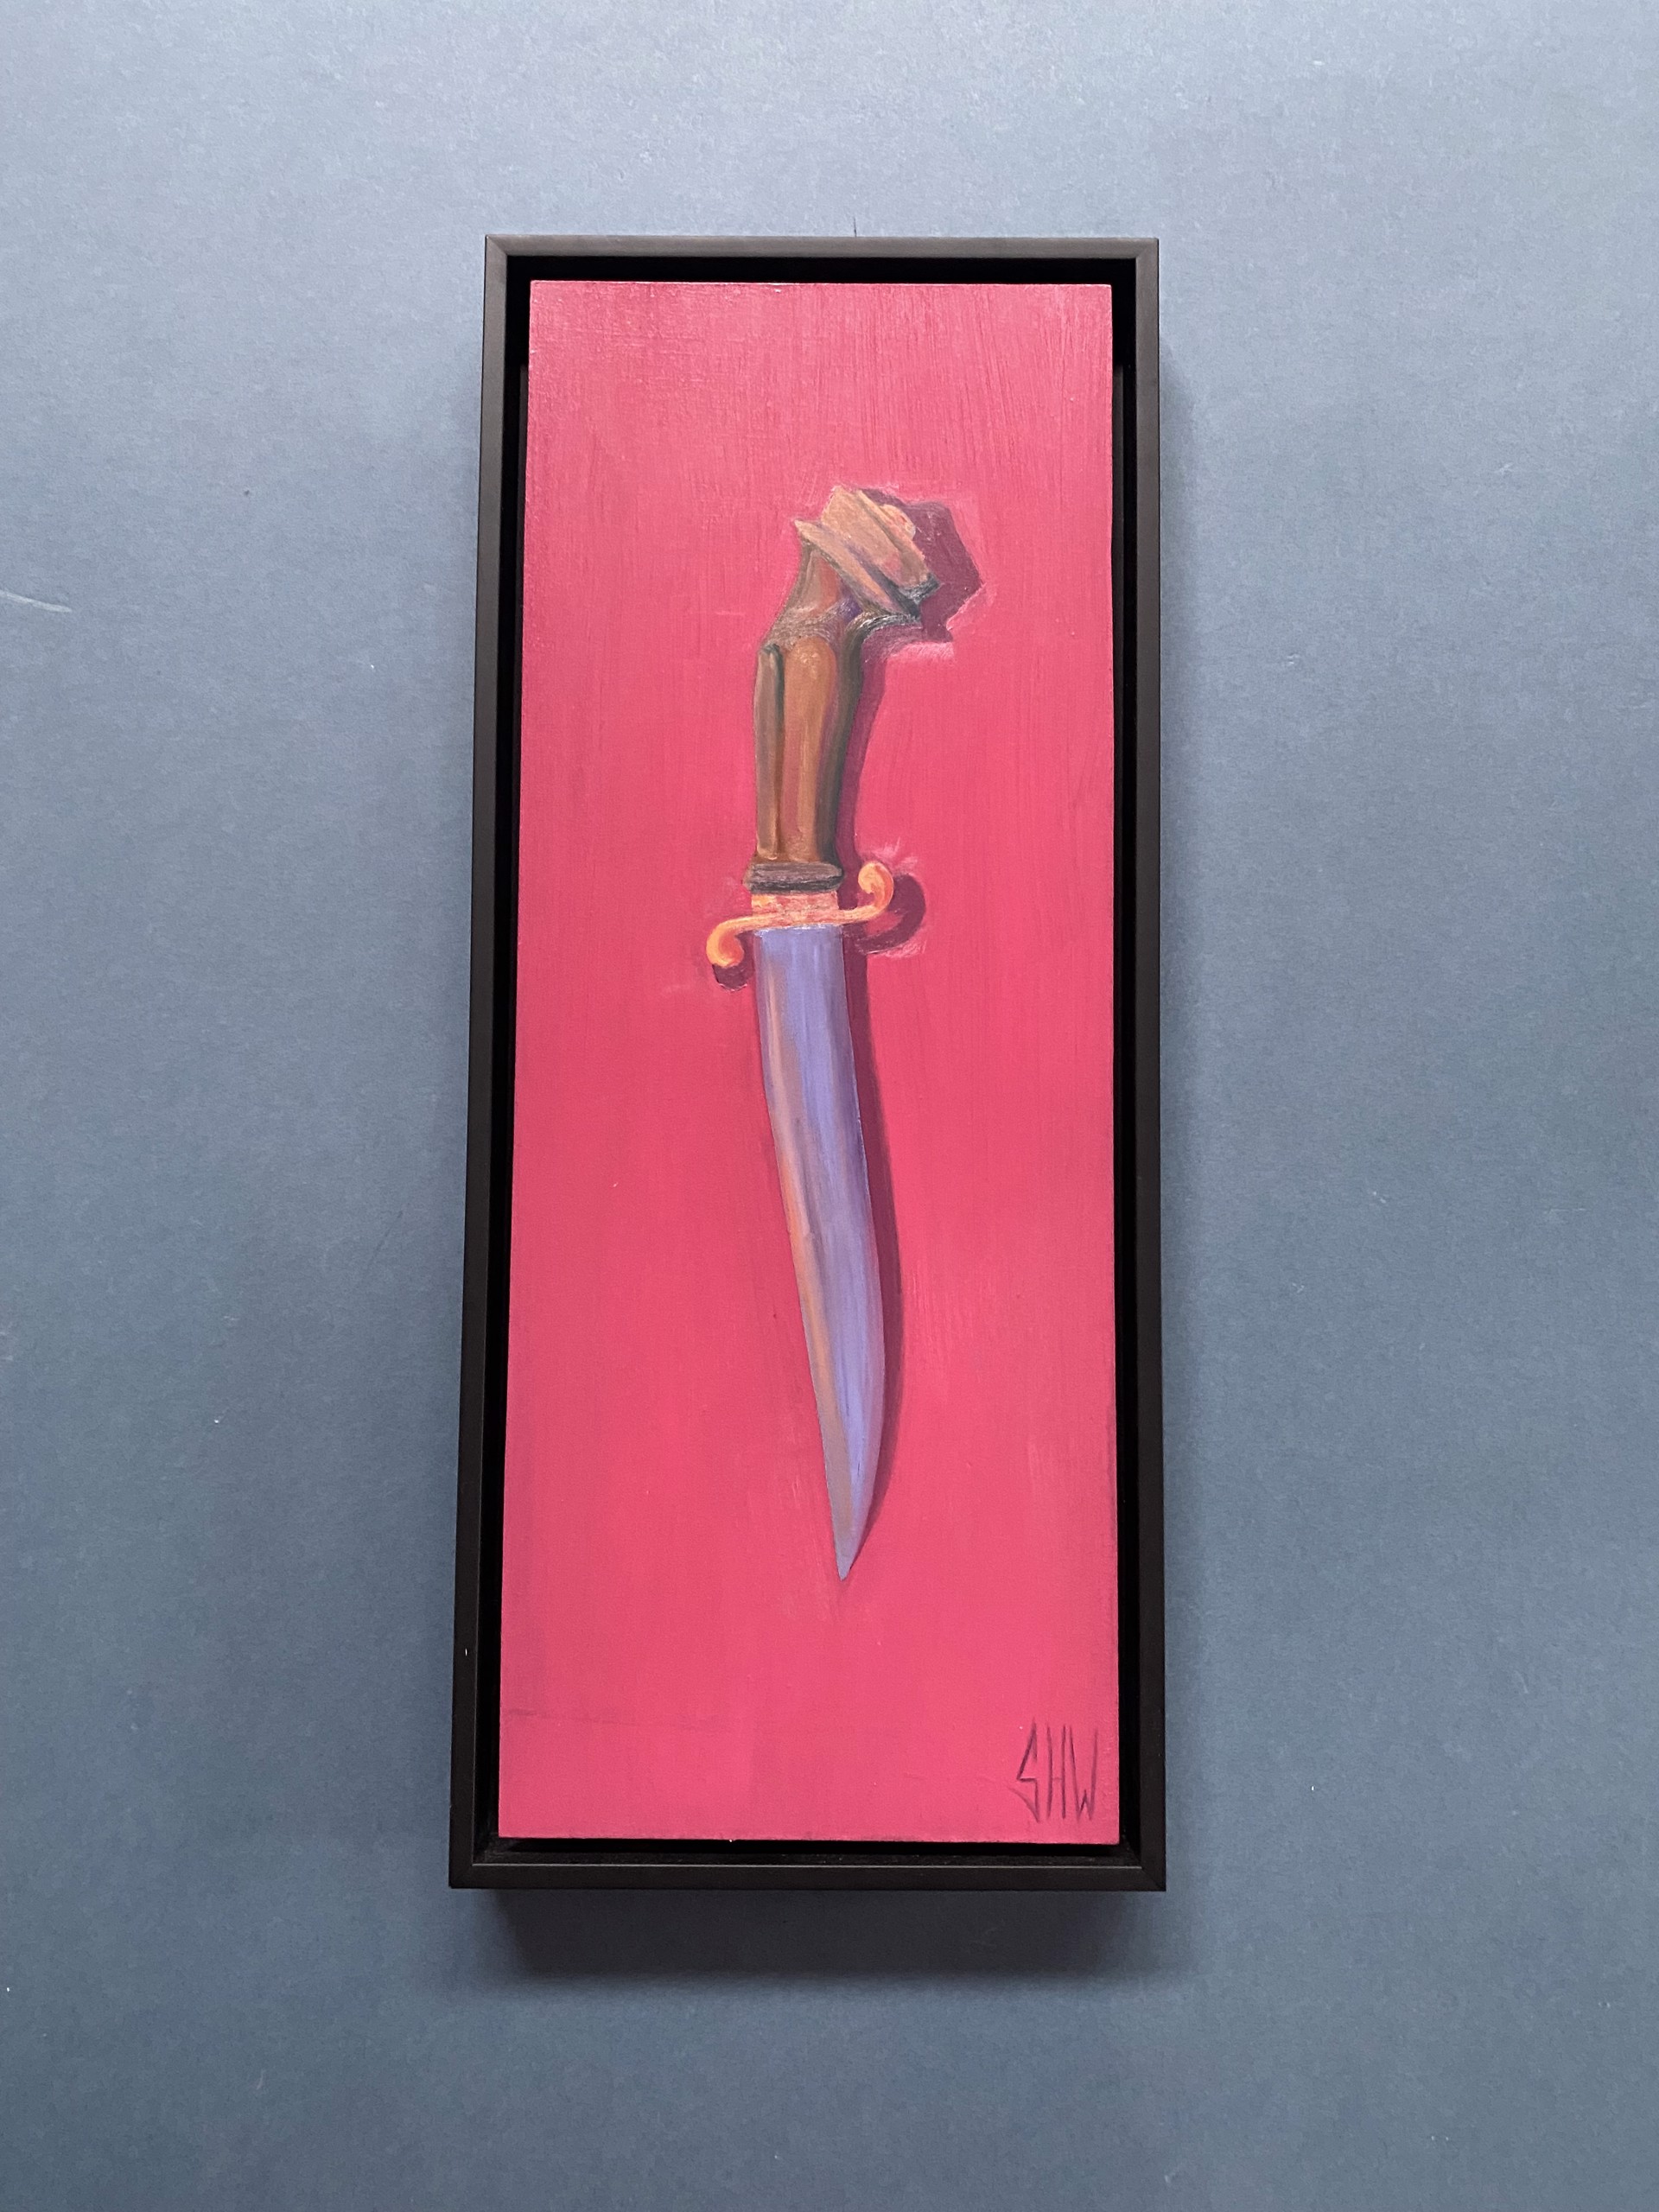 Knife No. 3 (Mom's Gift) by Stephen Wells